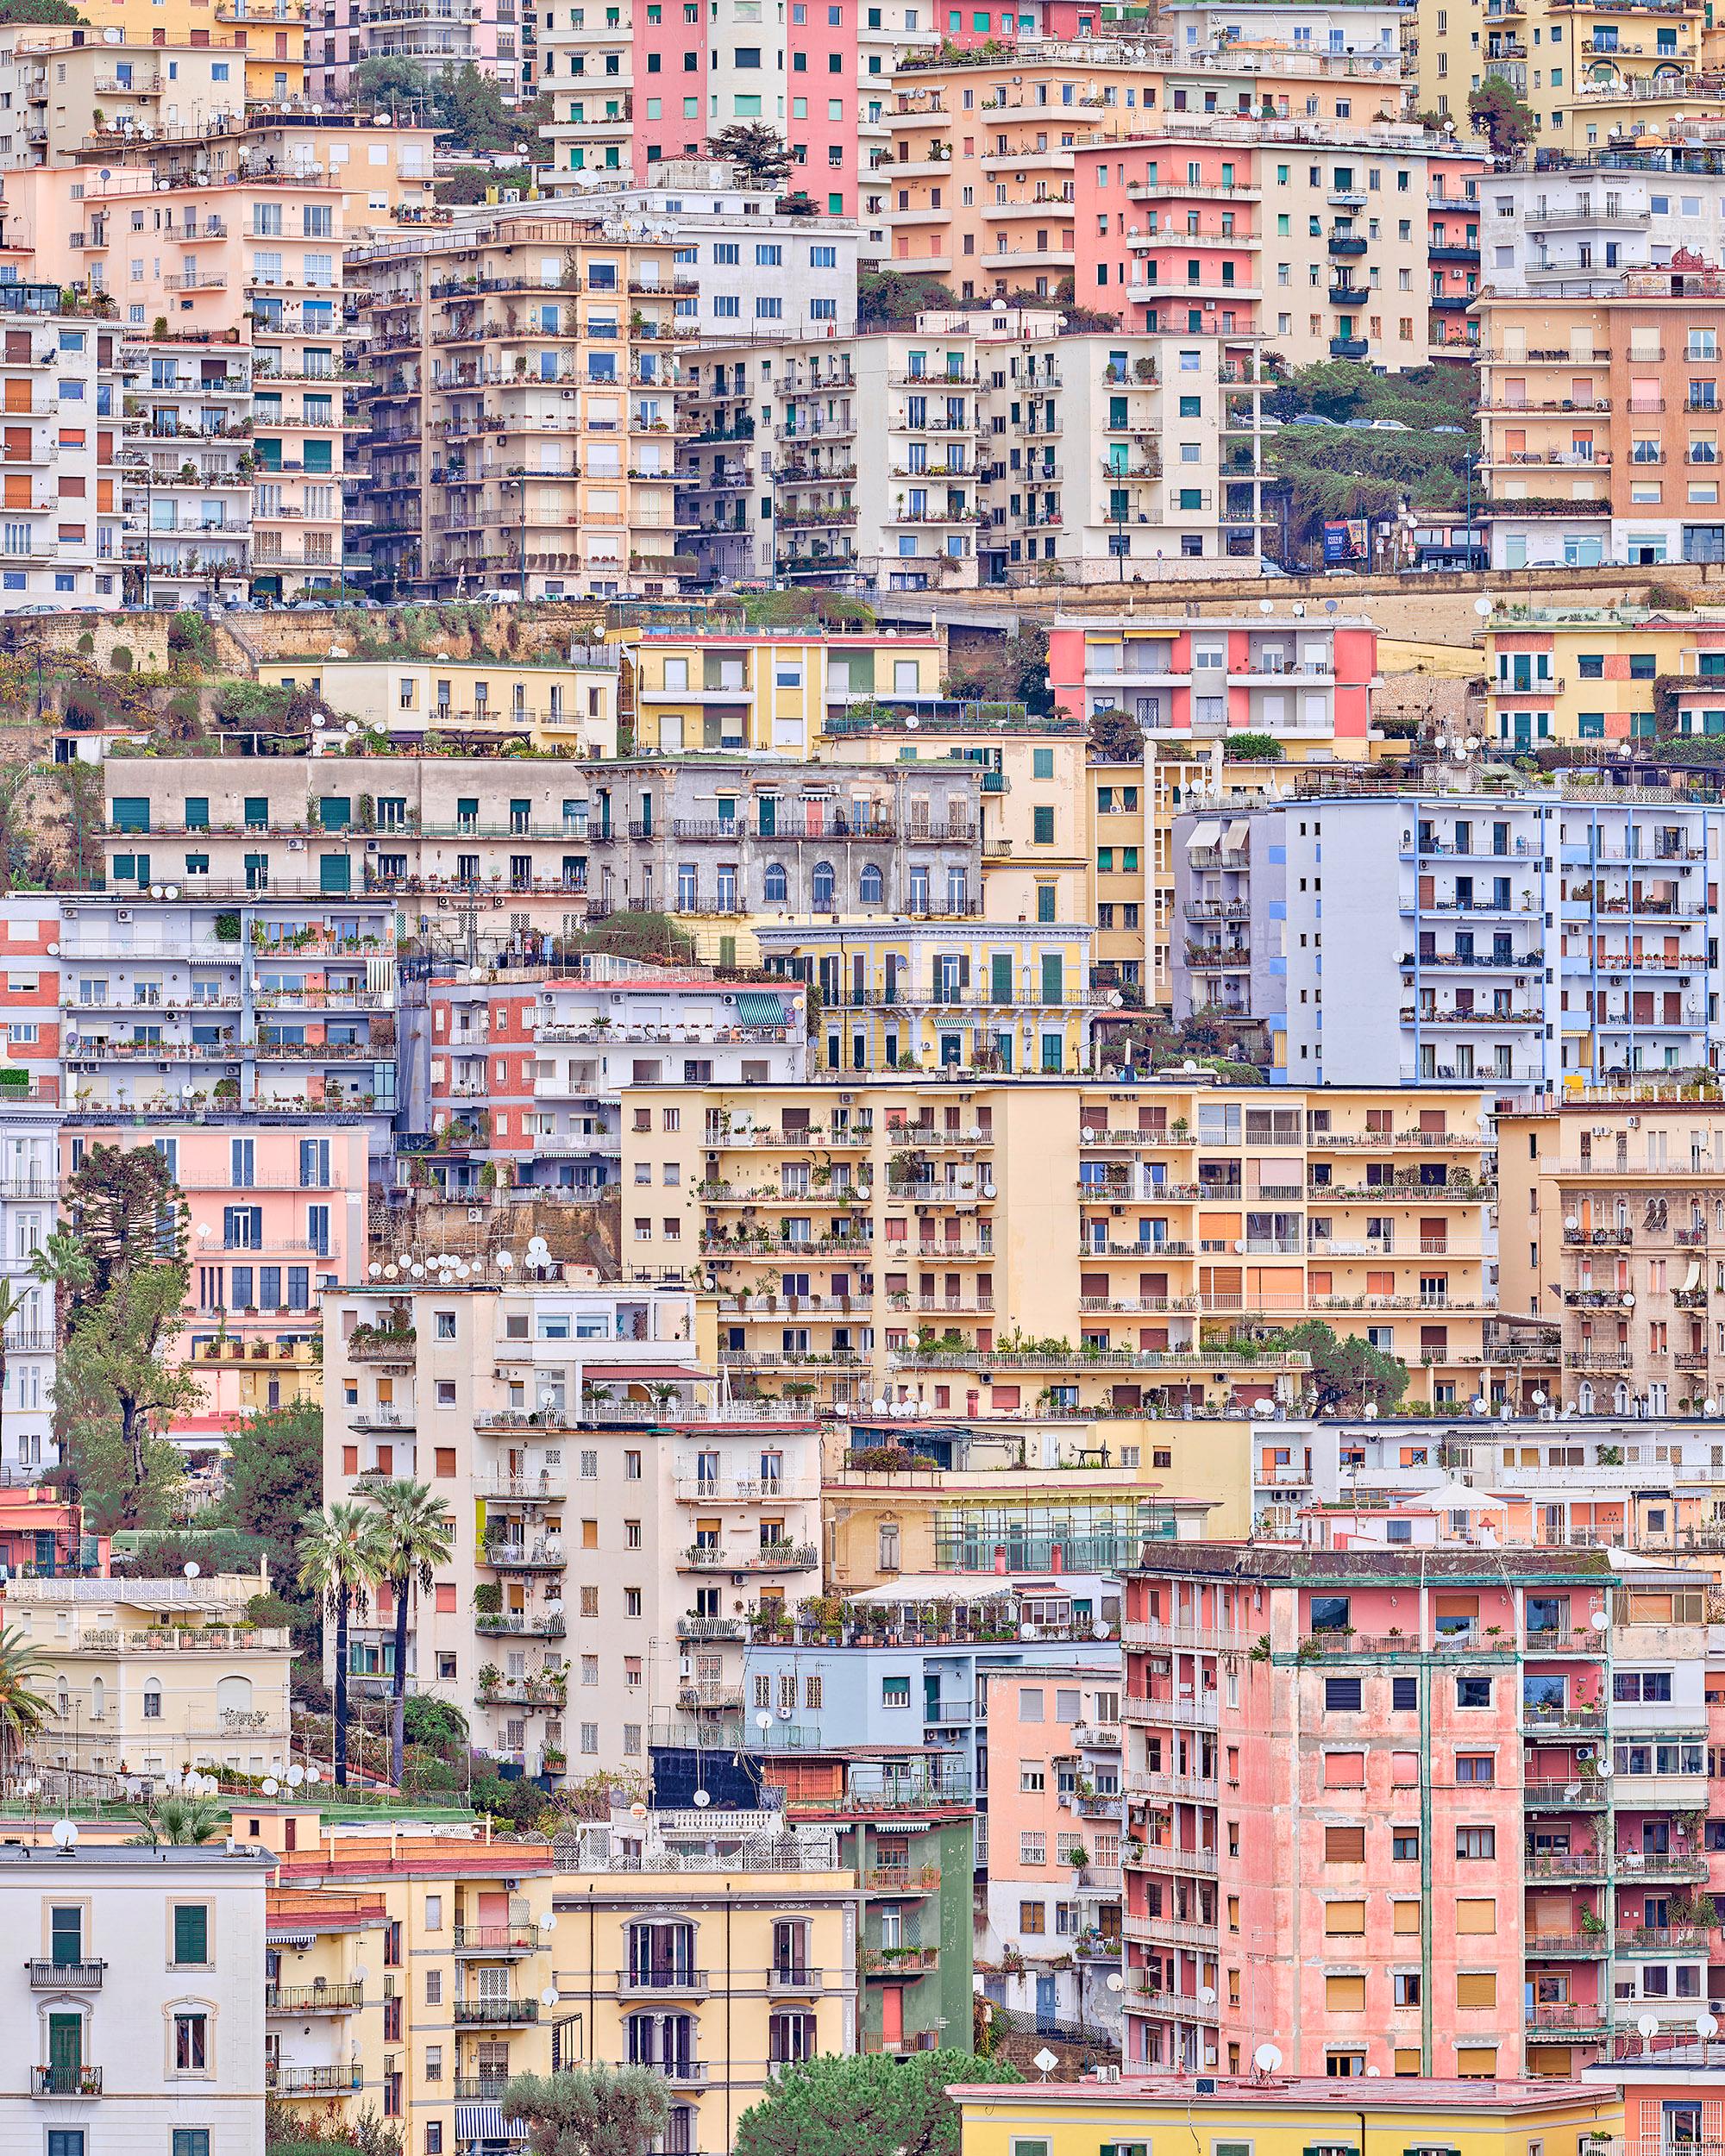 Naples, Italy

Available Sizes:
26 x 21 inches: Edition of 7
40 x 32 inches: Edition of 7
55 x 44 inches: Edition of 10
73.5 x 59 inches: Edition of 5

David Burdeny (b. 1968. Winnipeg, Canada) graduated with a Masters in Architecture and Interior